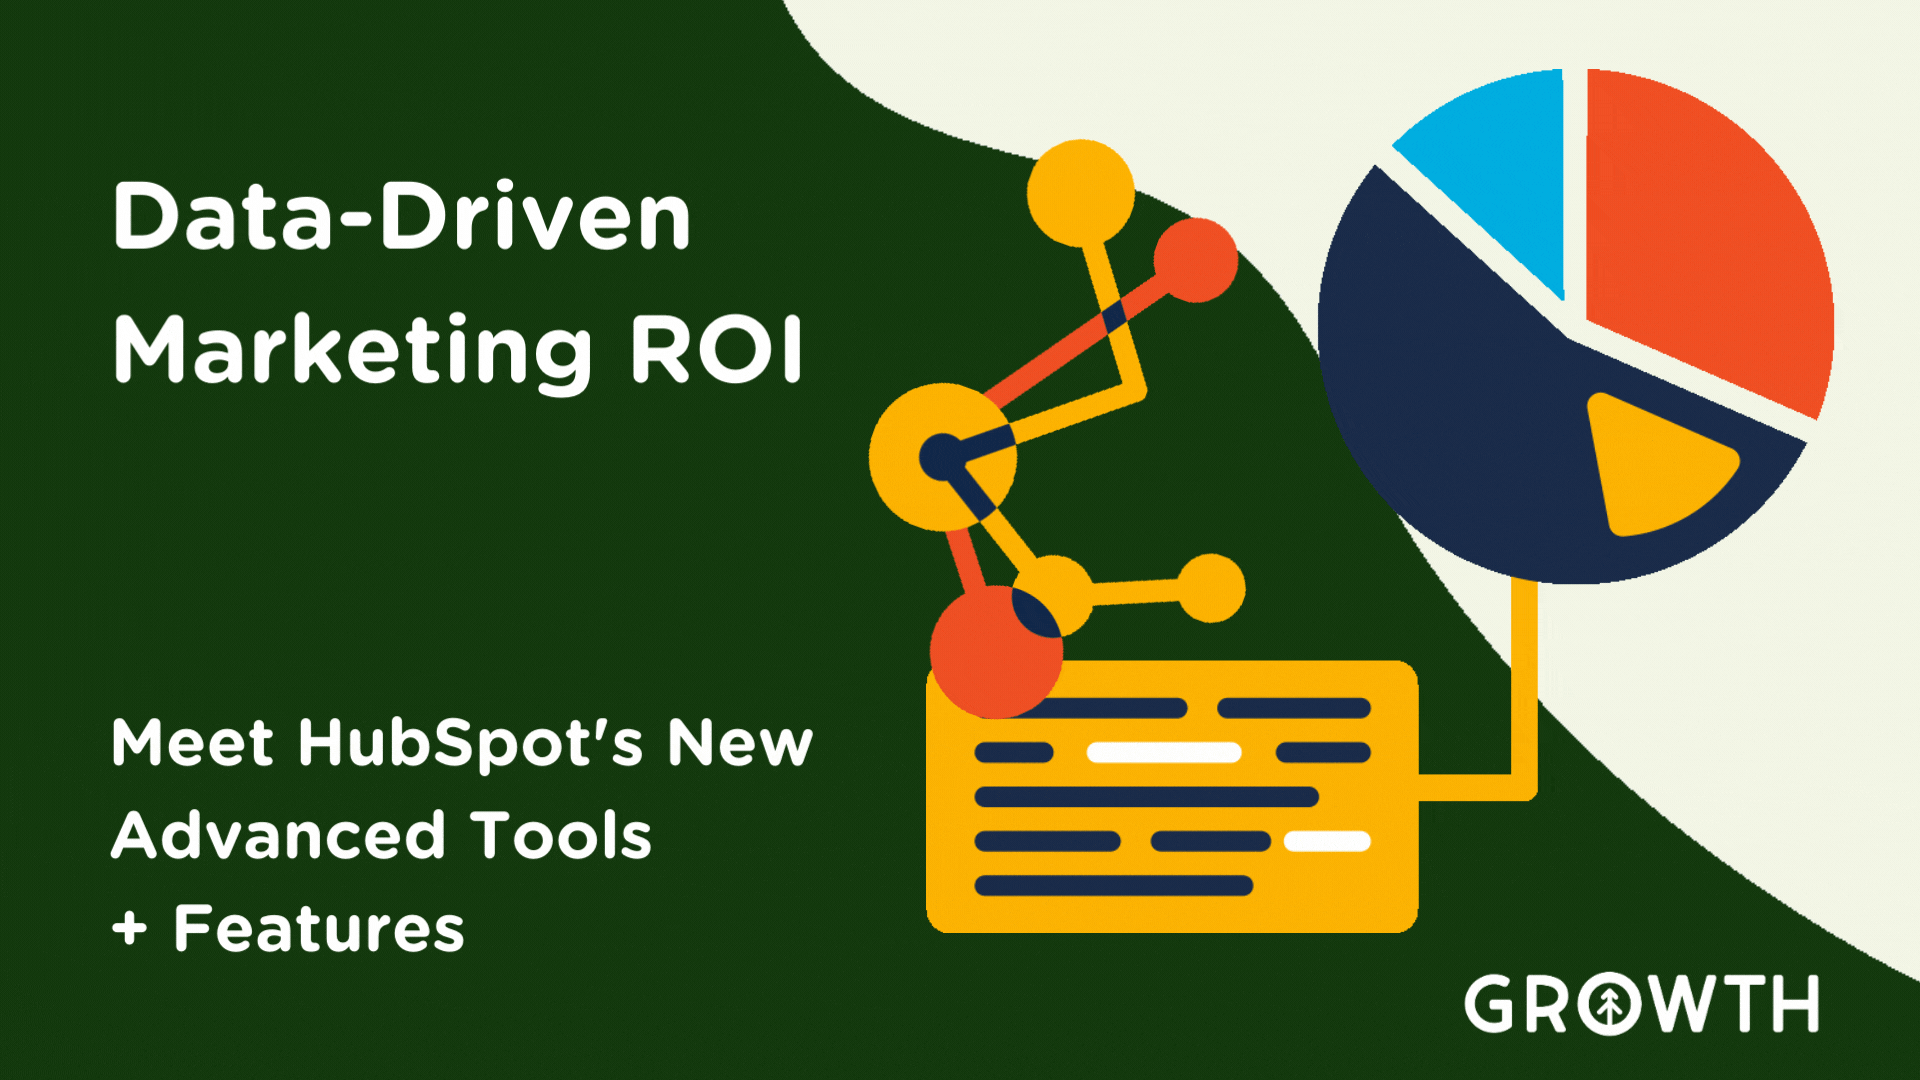 Data-Driven Marketing ROI with HubSpot's New Advanced Reporting Tools